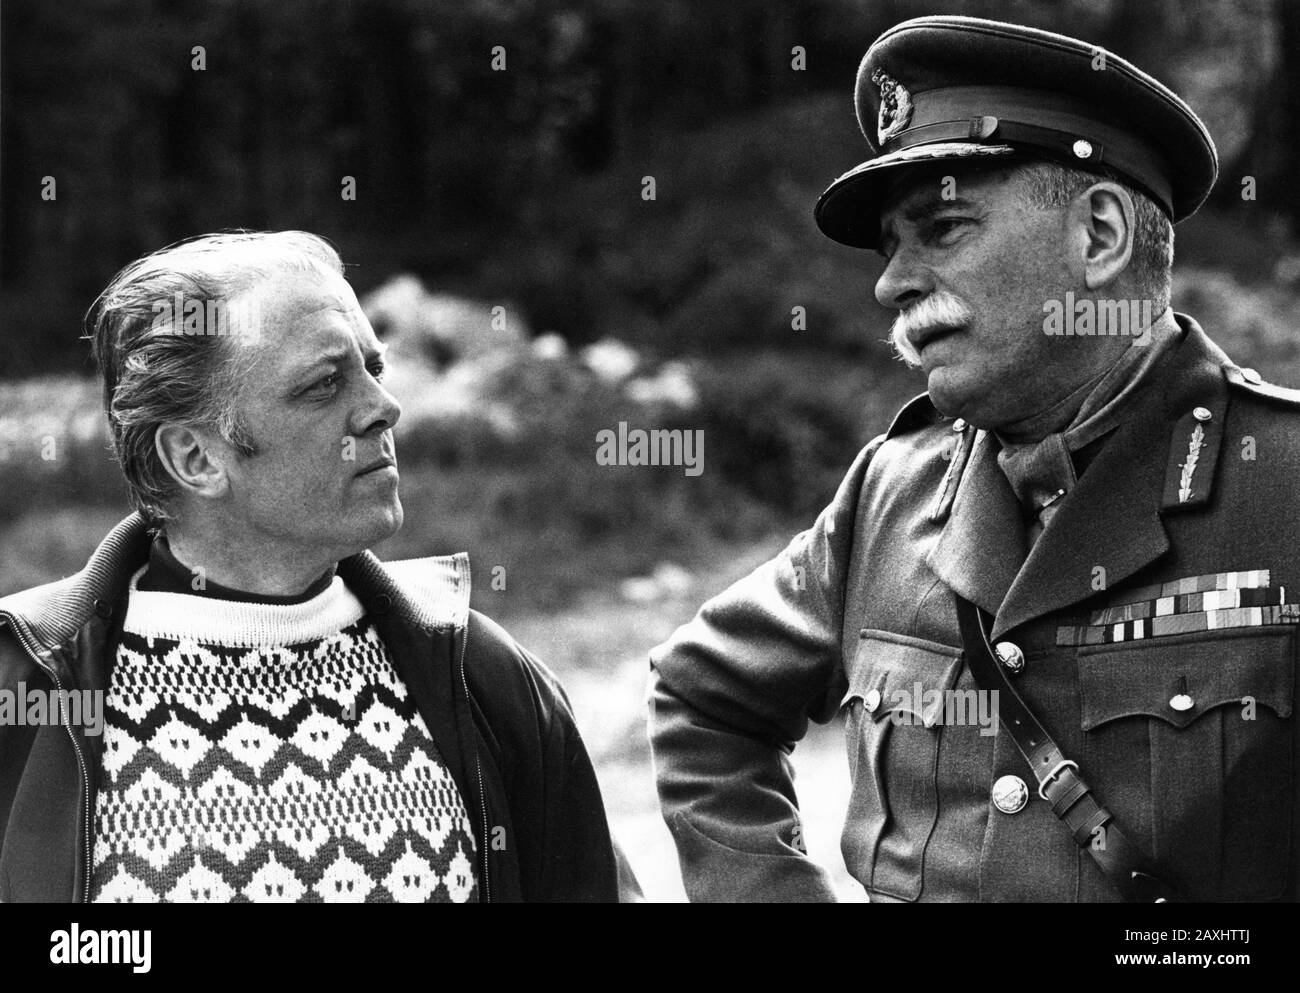 Director RICHARD ATTENBOROUGH and LAURENCE OLIVIER in costume as Field  Marshal Sir John French on set location candid filming OH ! WHAT A LOVELY  WAR 1969 based on Joan Littlewood's Theatre Workshop